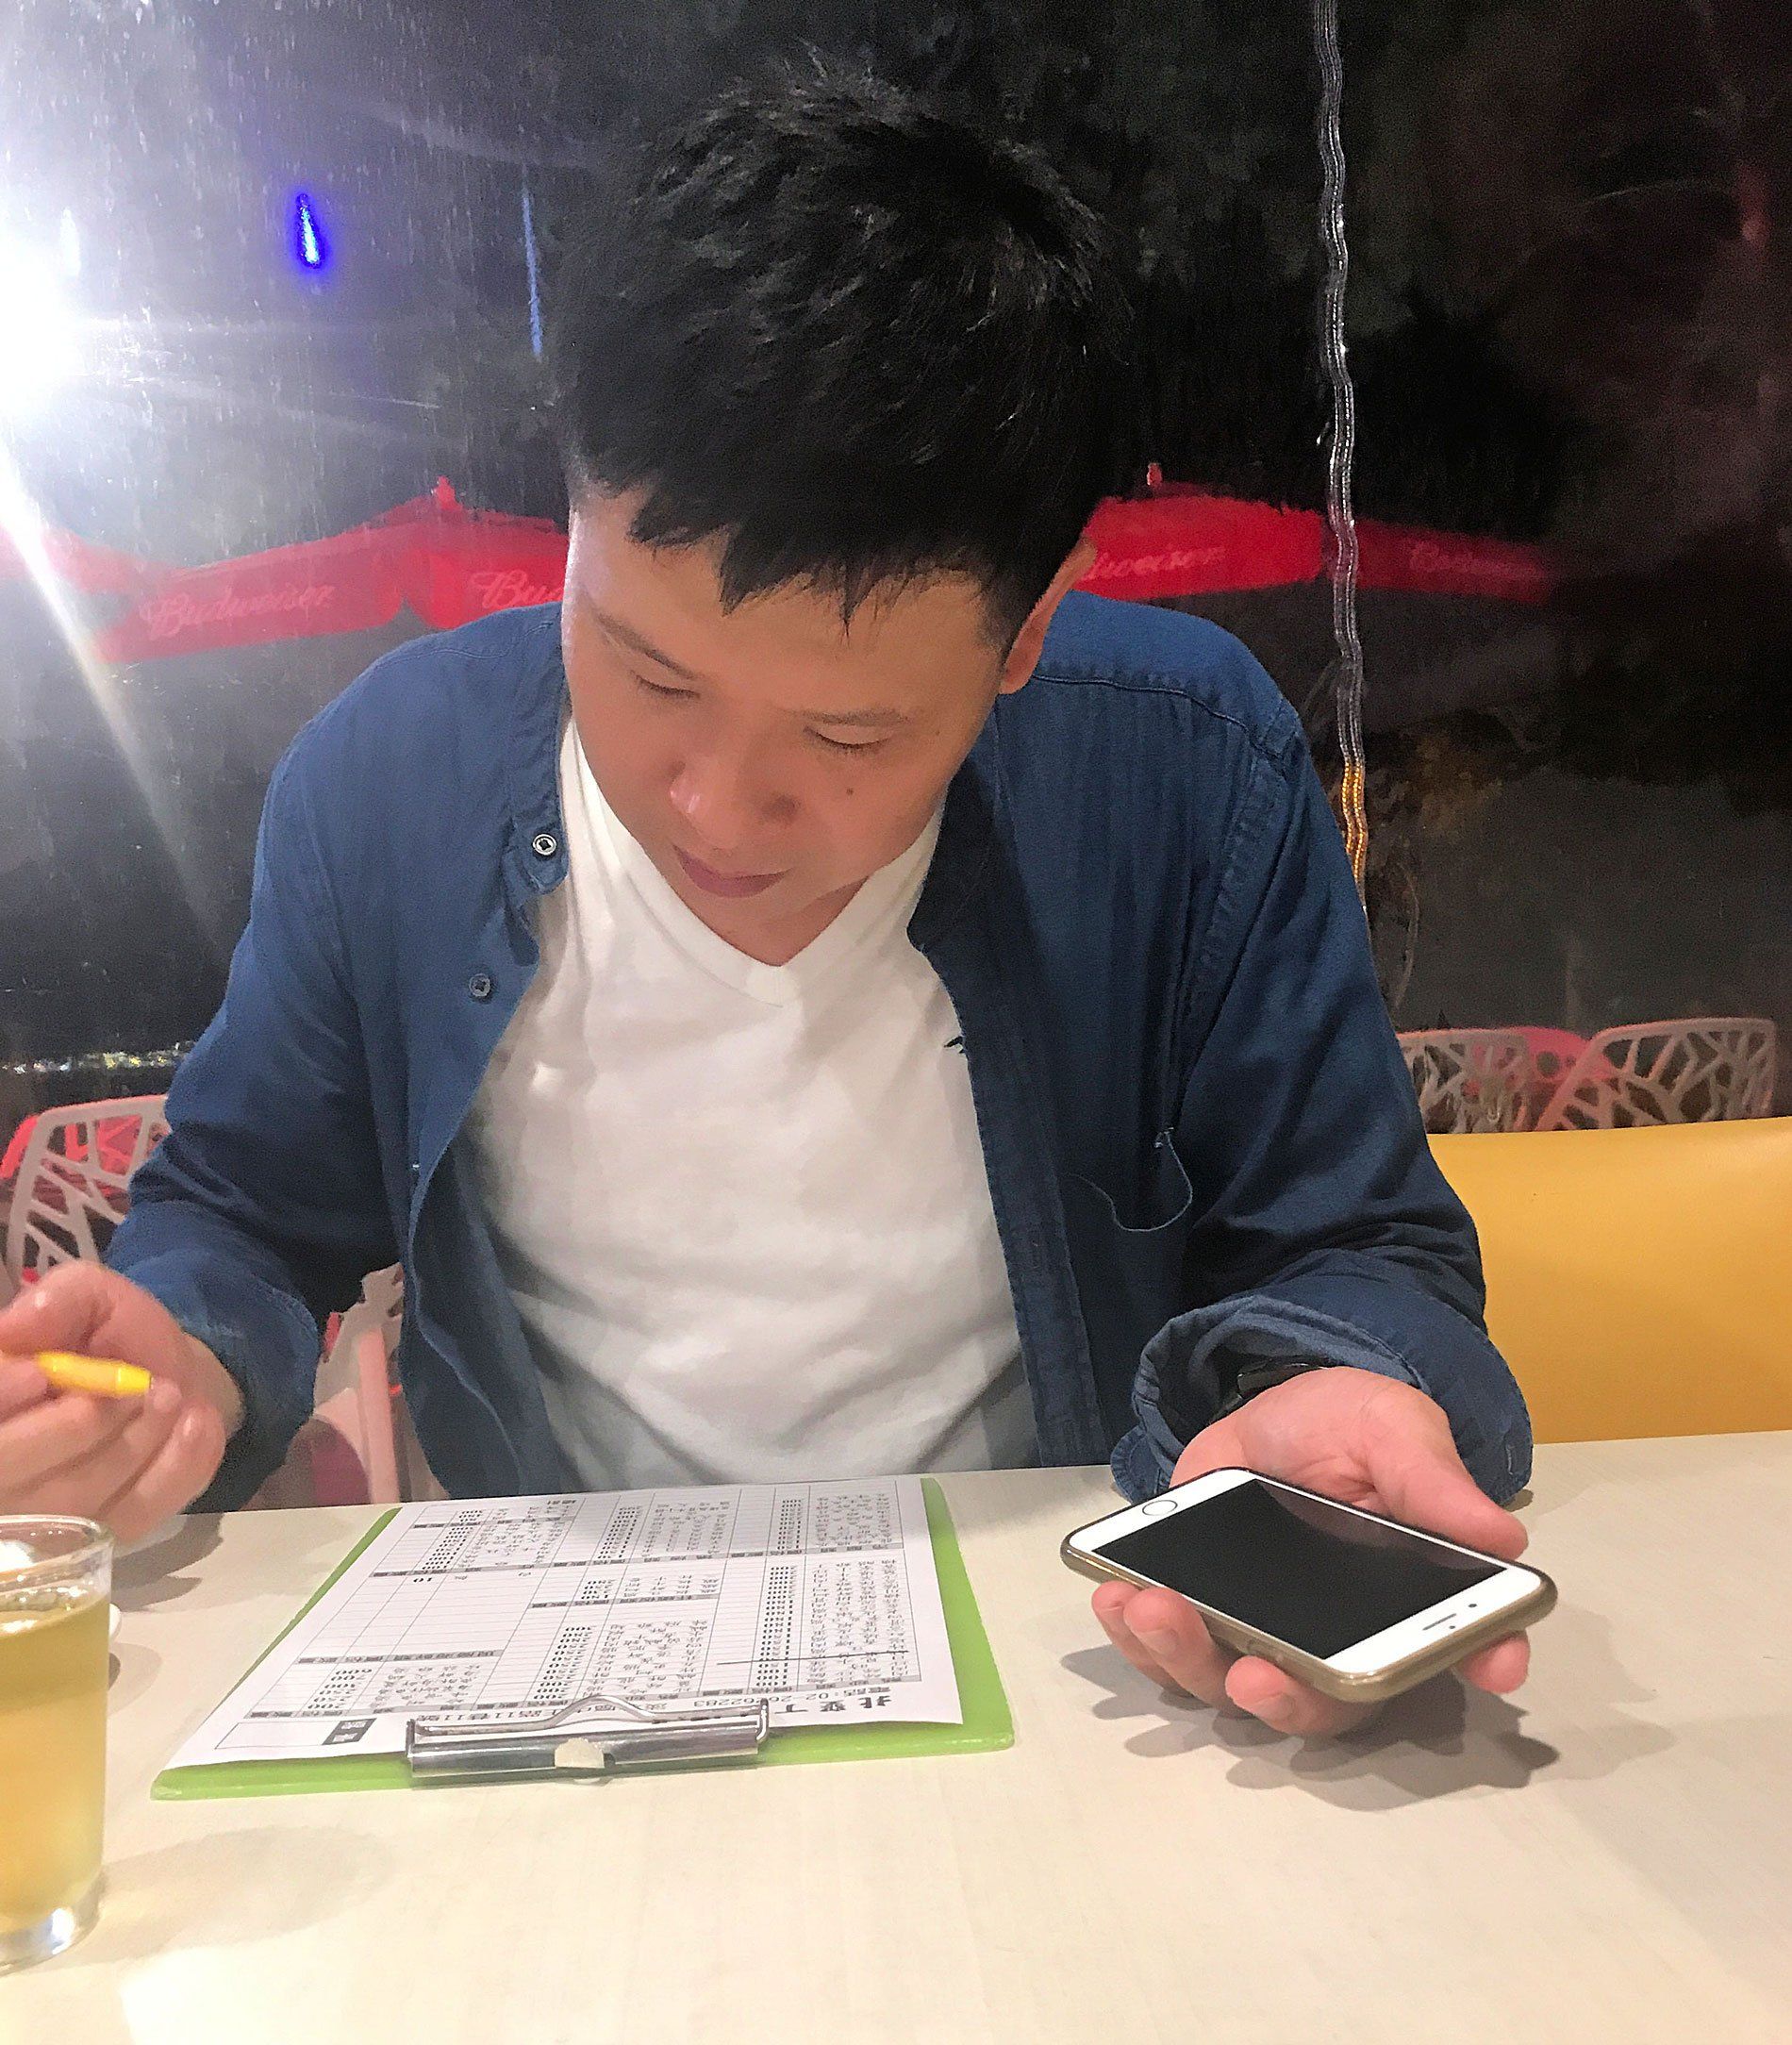 Wei Jiang orders dinner for an English-speaking journalist using his cell phone’s Google Translate app to communicate with her. Image by Melissa McCart. Taiwan, 2018. 